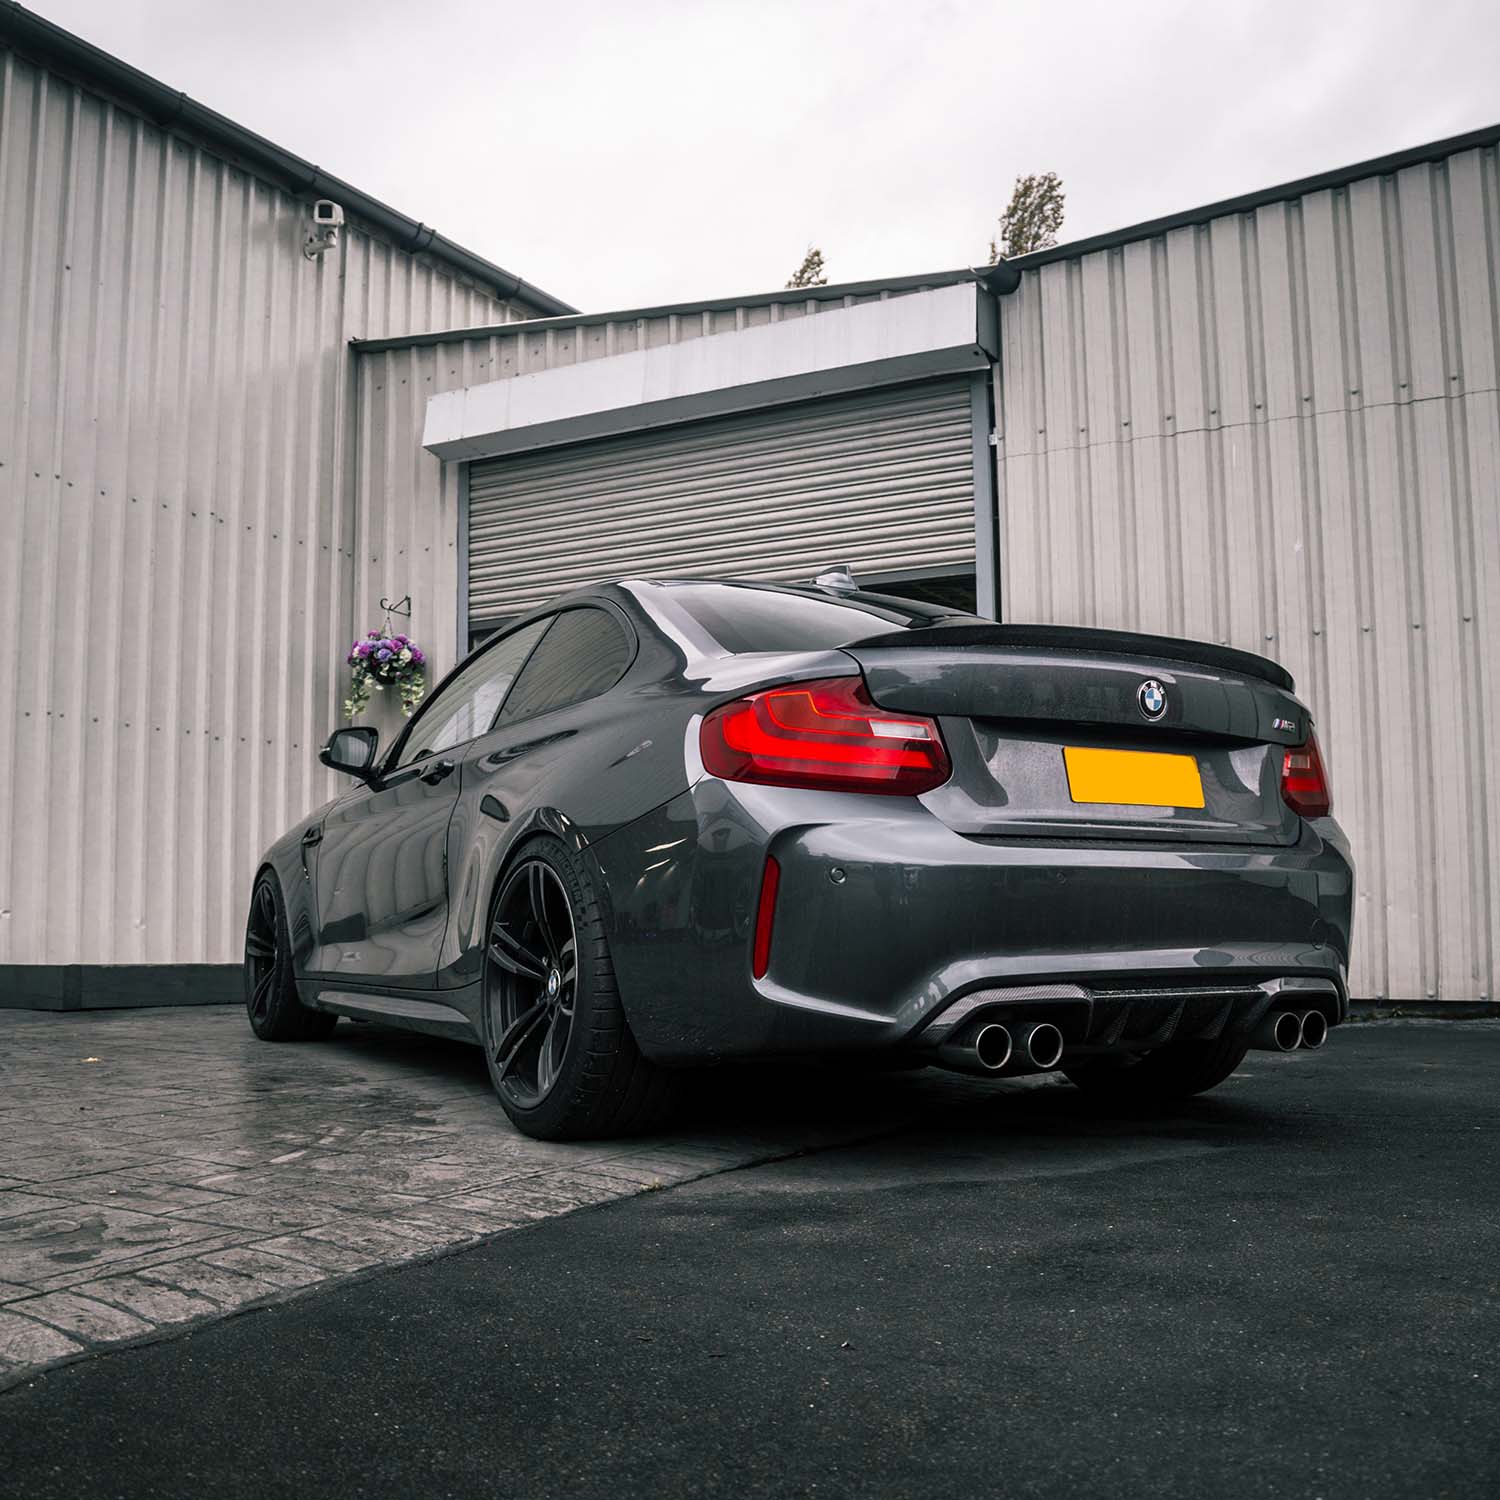 MHC+ BMW F87 M2 Gloss Carbon Fibre Performance Rear Diffuser Fitted On Grey Car Rear Quarter